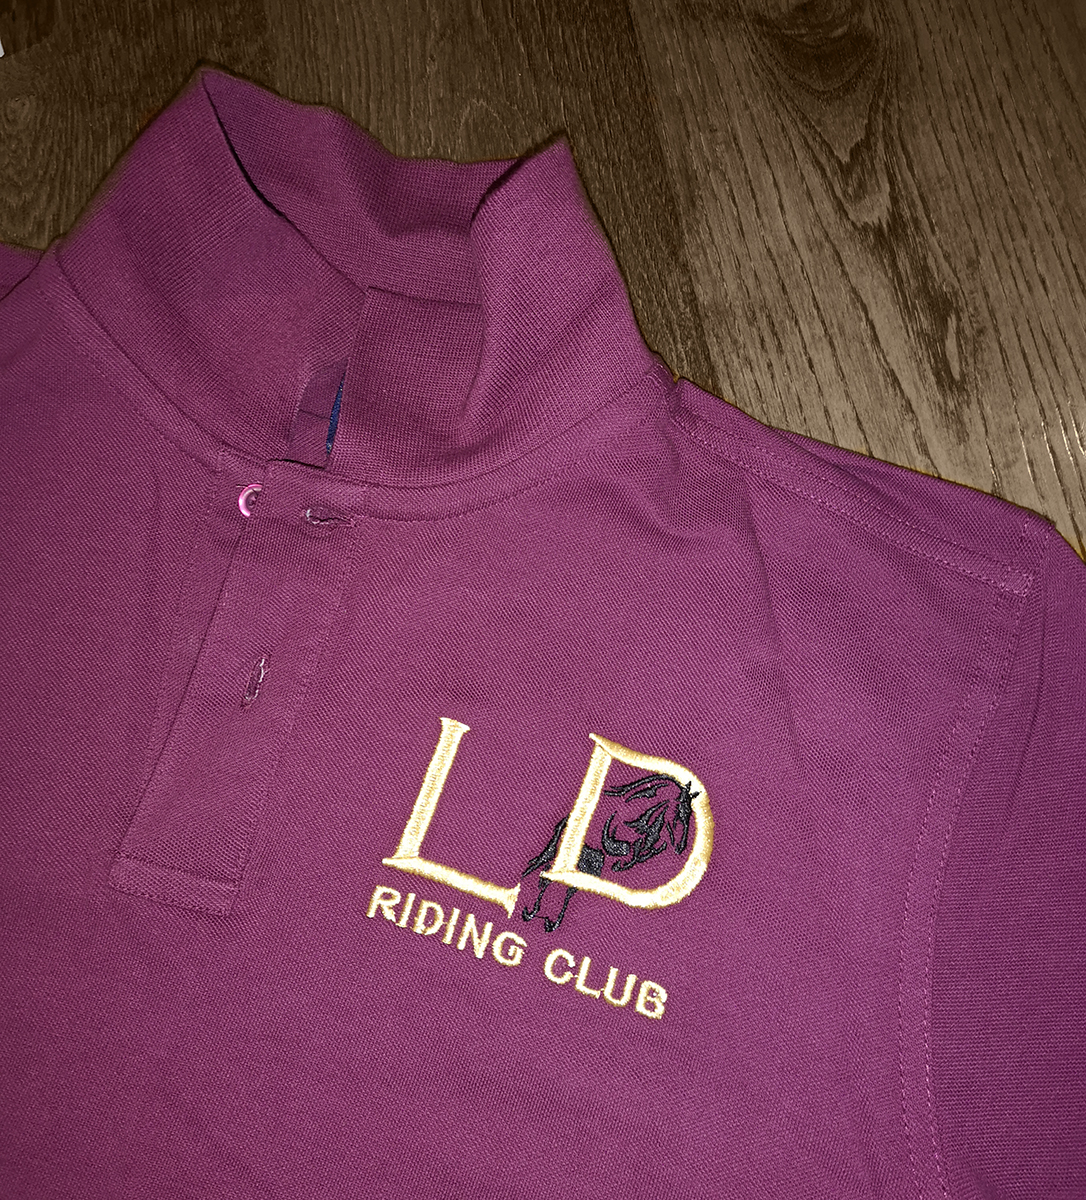 Polo's - £12.50 (front emb only) £16.50 (front and back emb)